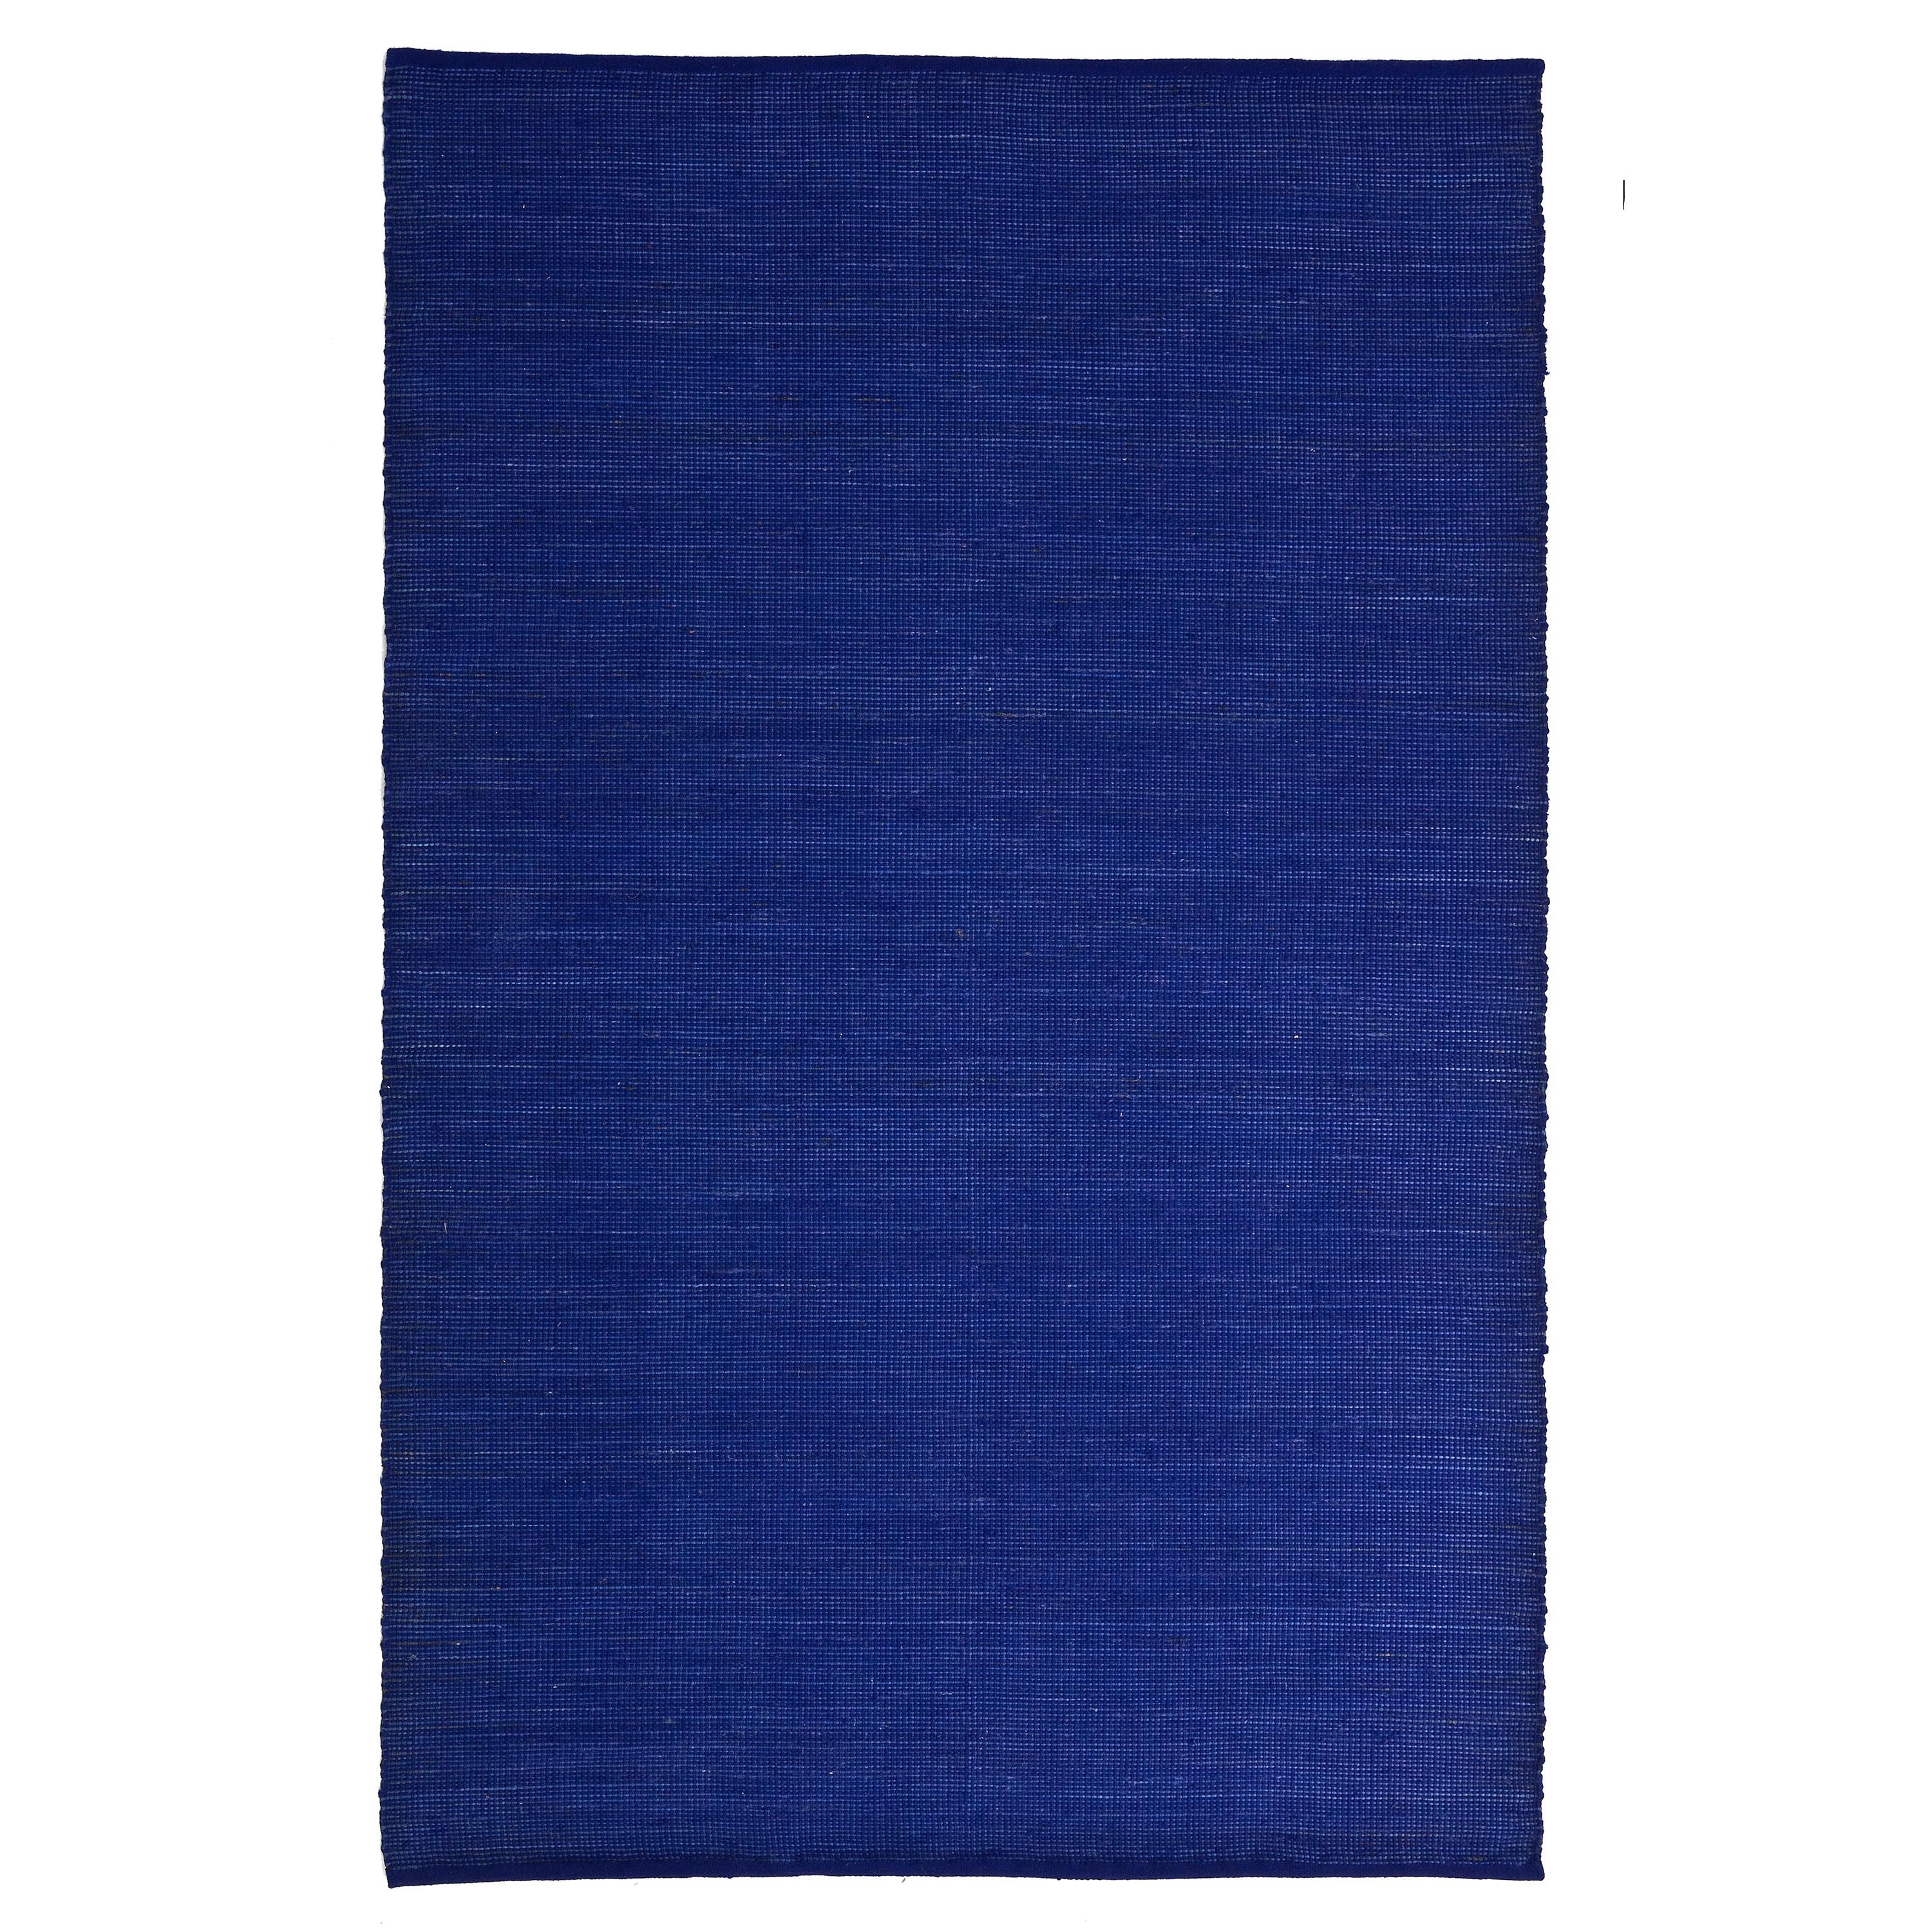 'Tatami' Rug by Ariadna Miquel and Nani Marquina for Nanimarquina For Sale 5